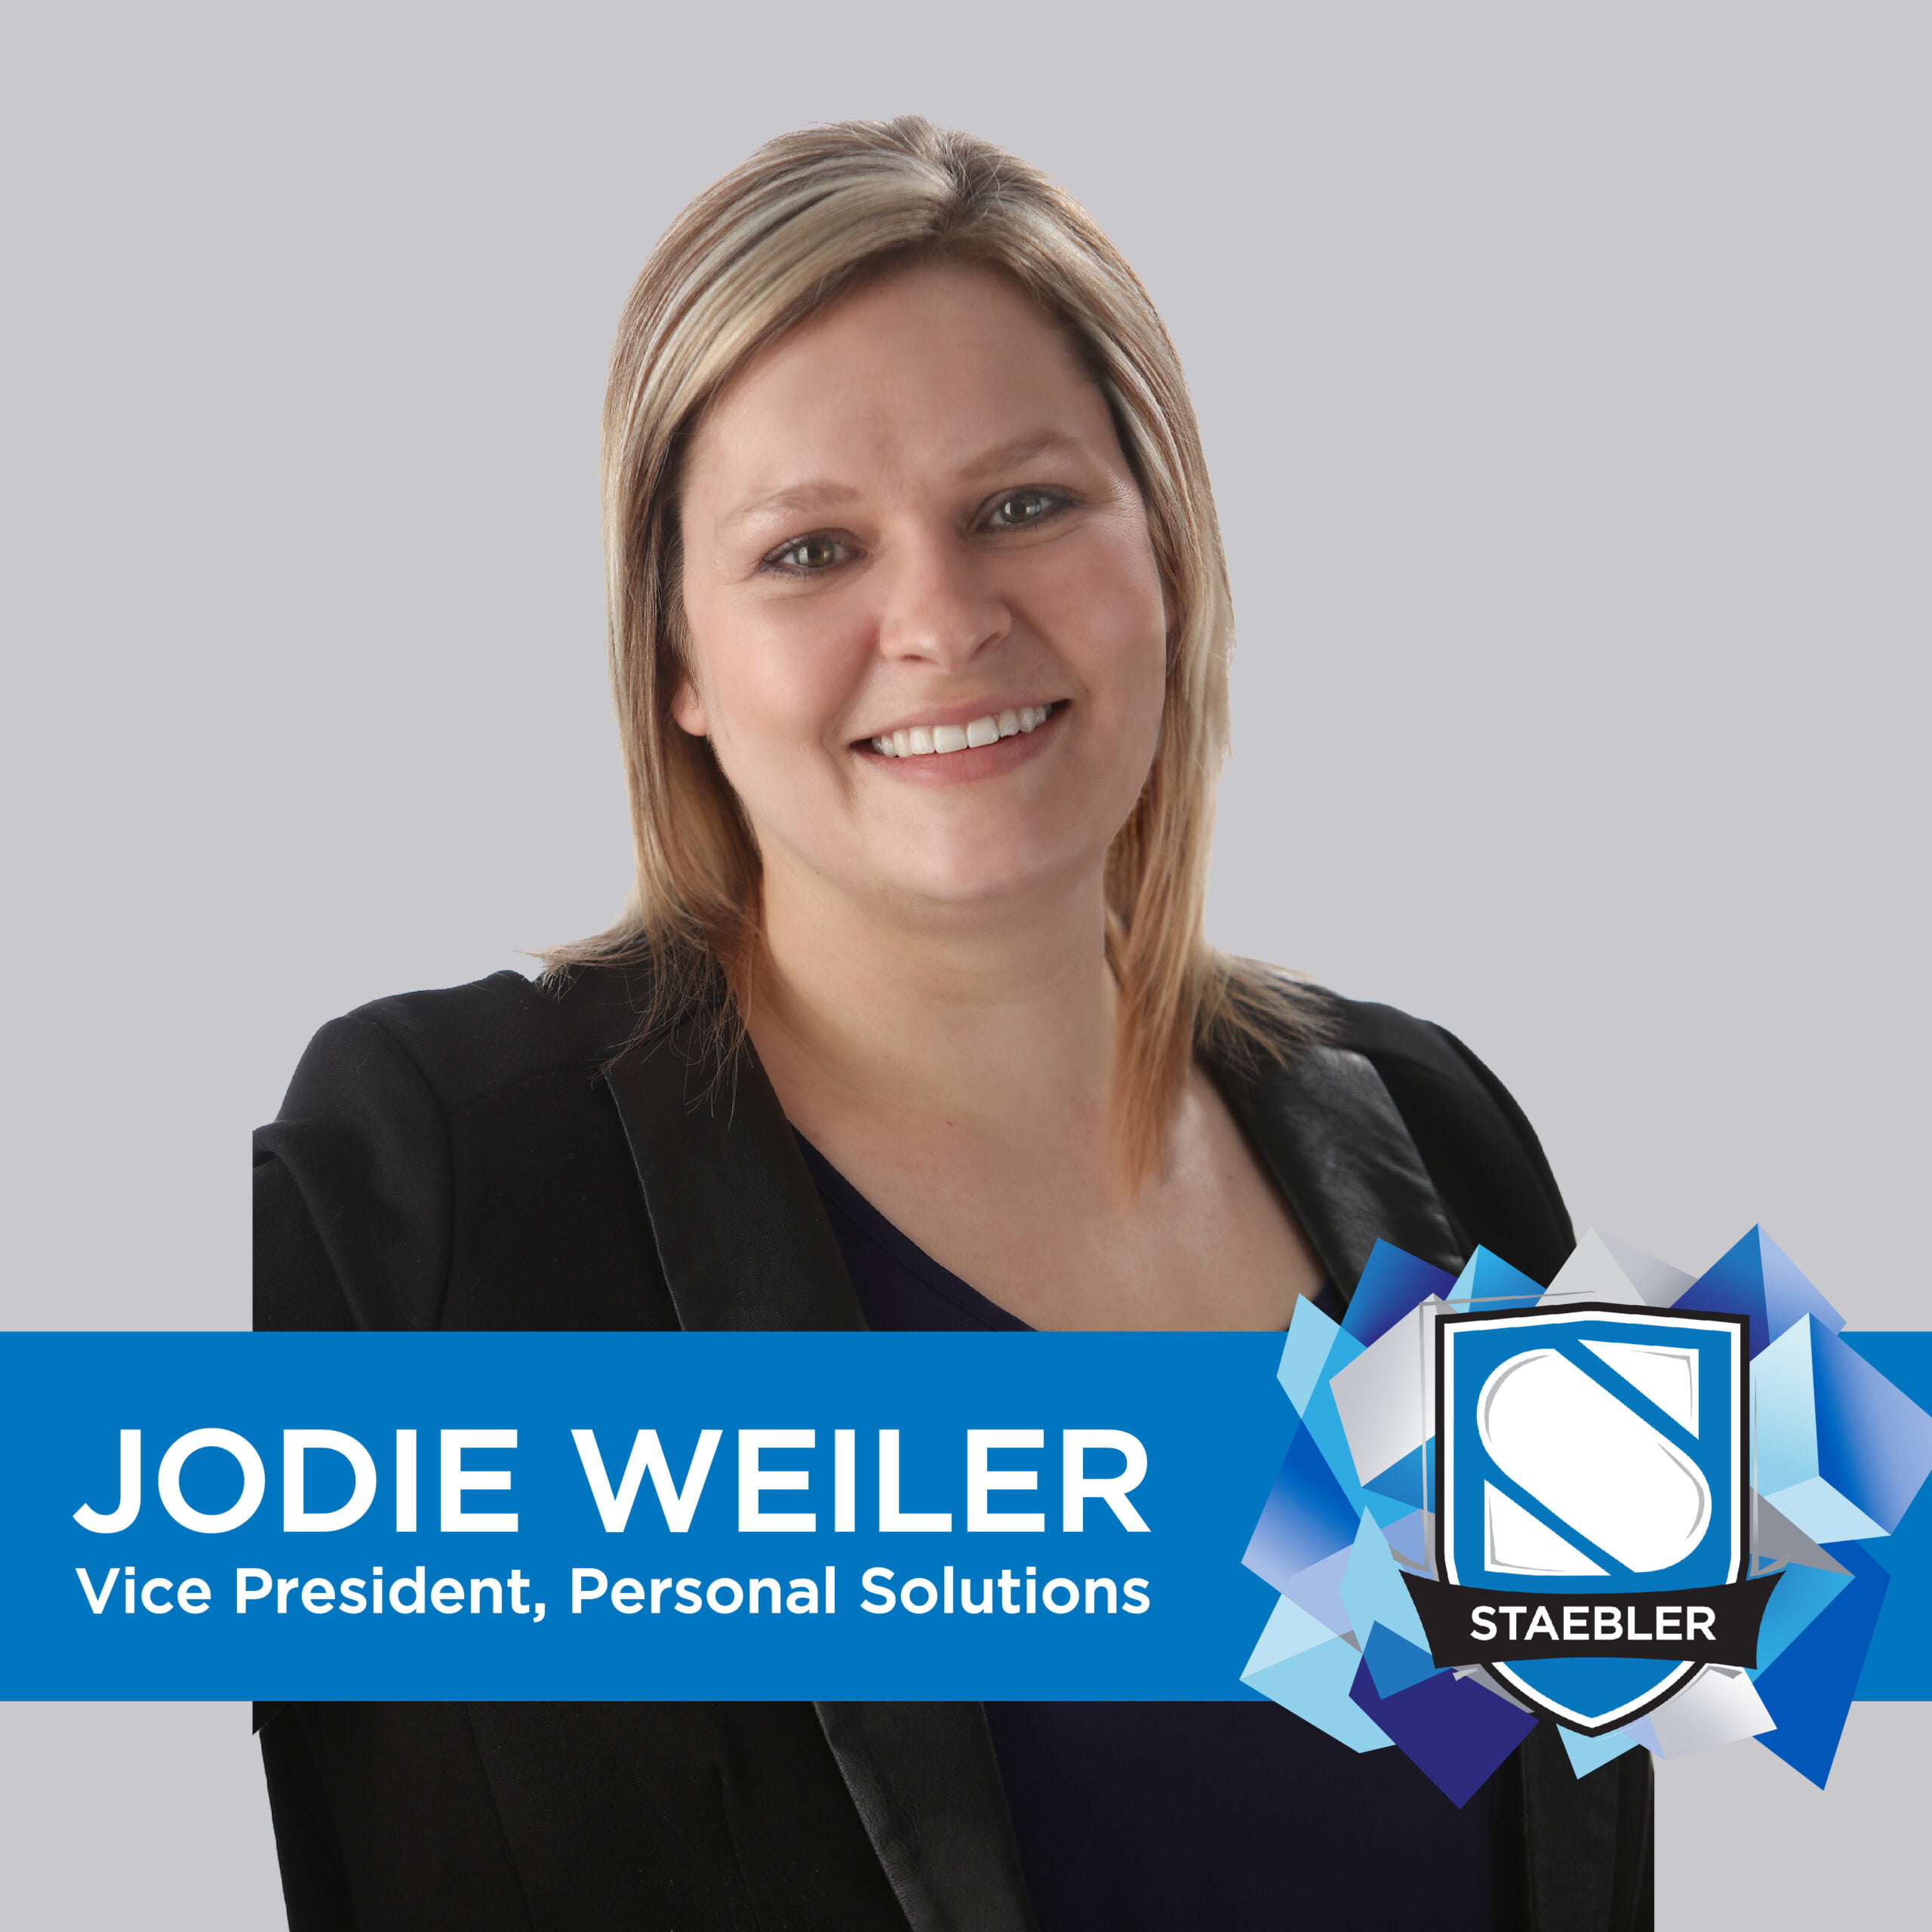 Jodie Weiler appointed Vice President, Personal Solutions